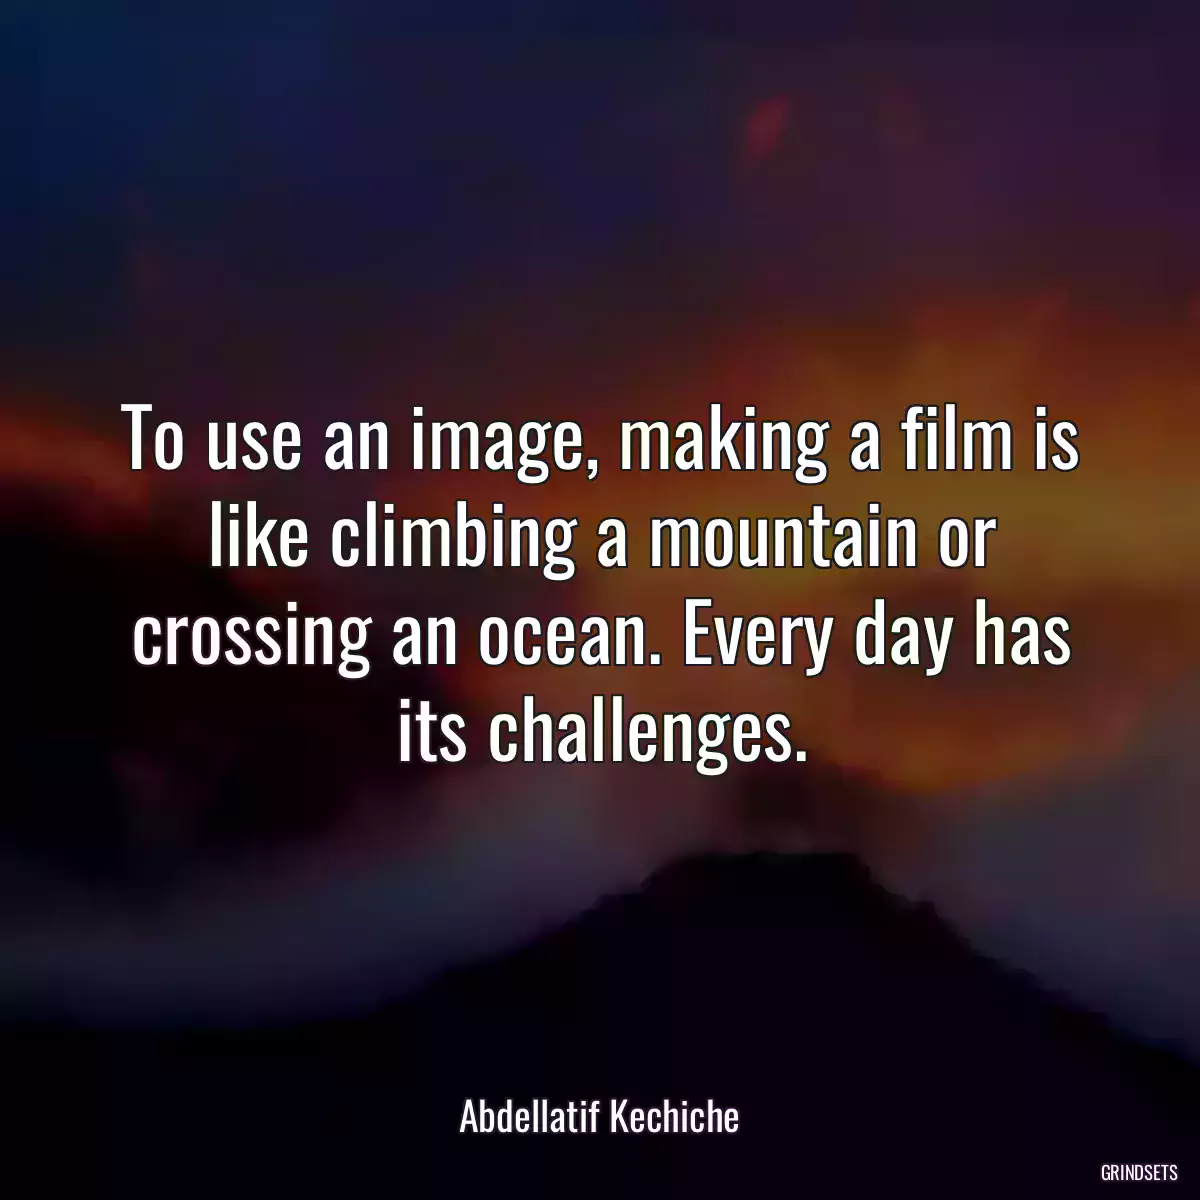 To use an image, making a film is like climbing a mountain or crossing an ocean. Every day has its challenges.